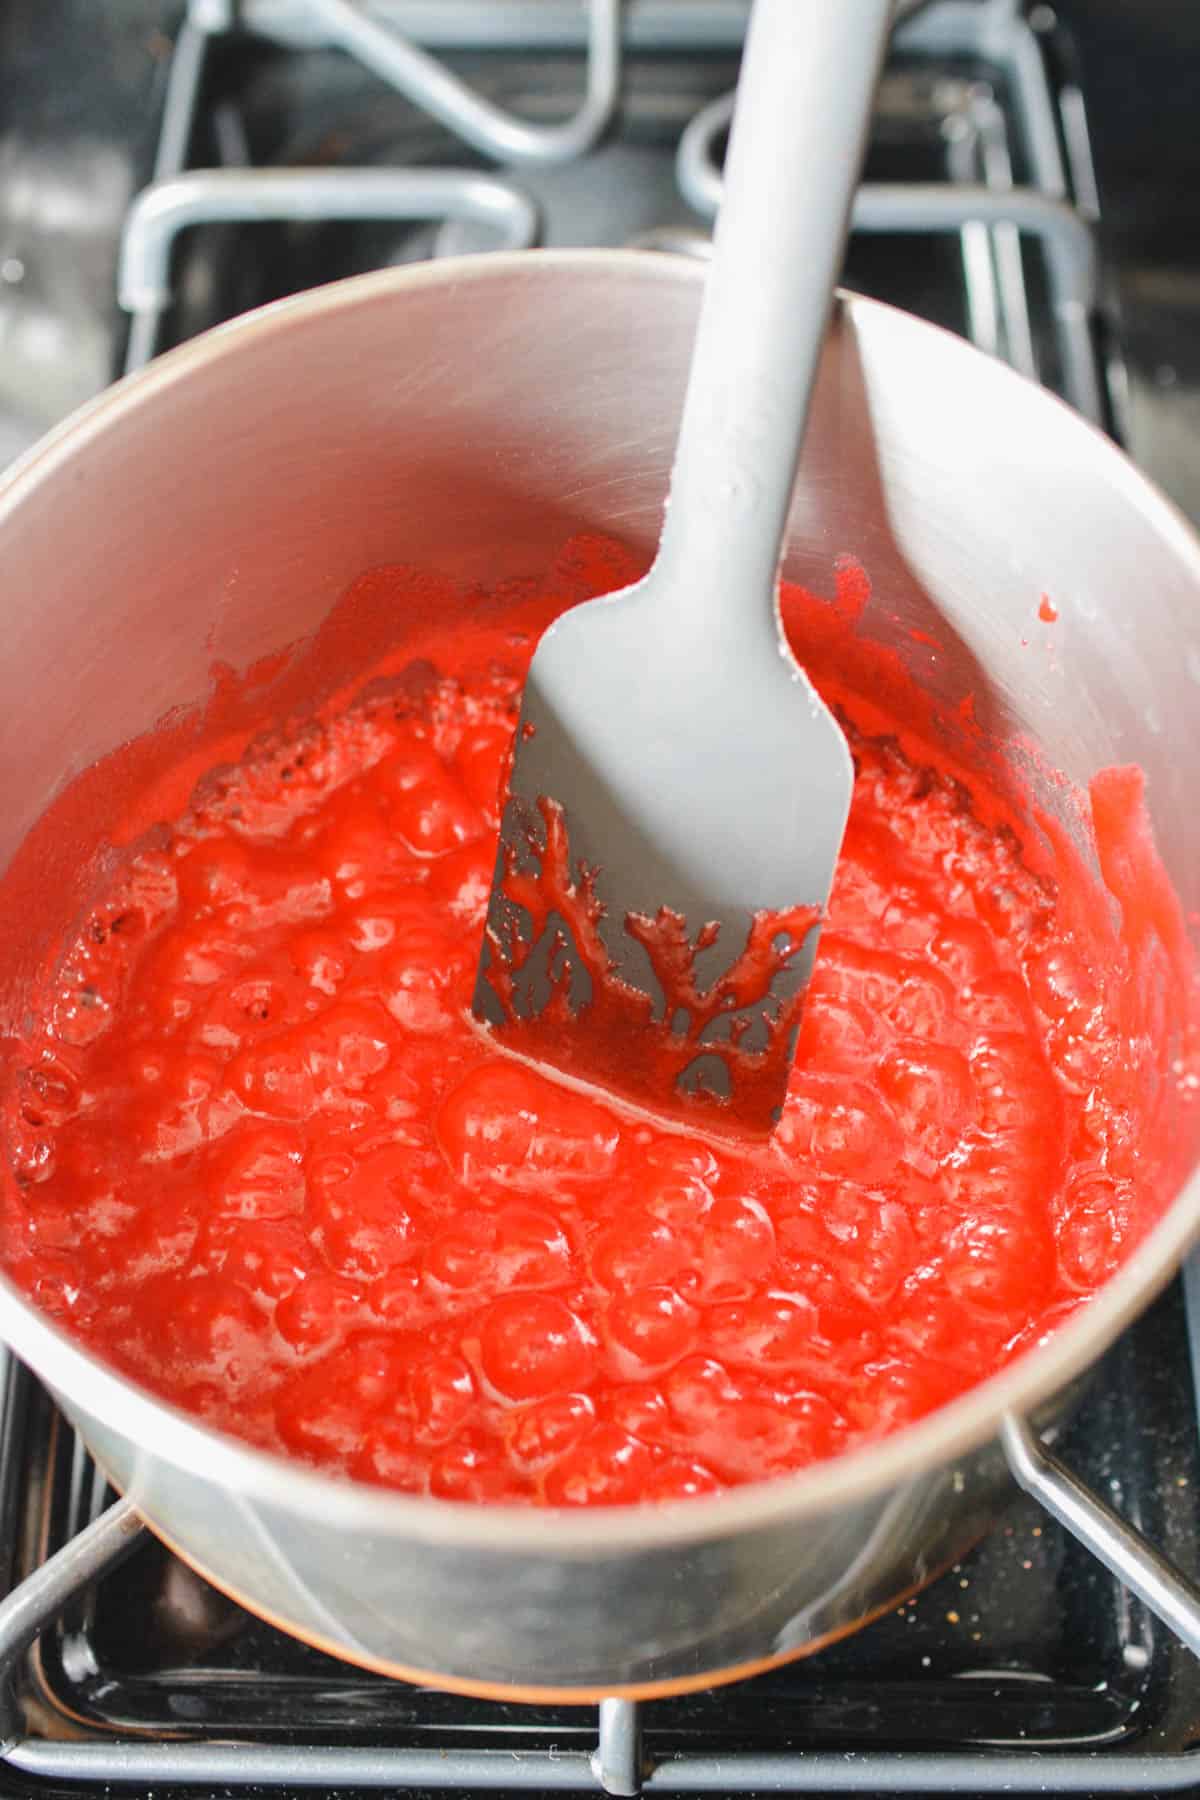 A pink candy mixture melted in a sauce pan.